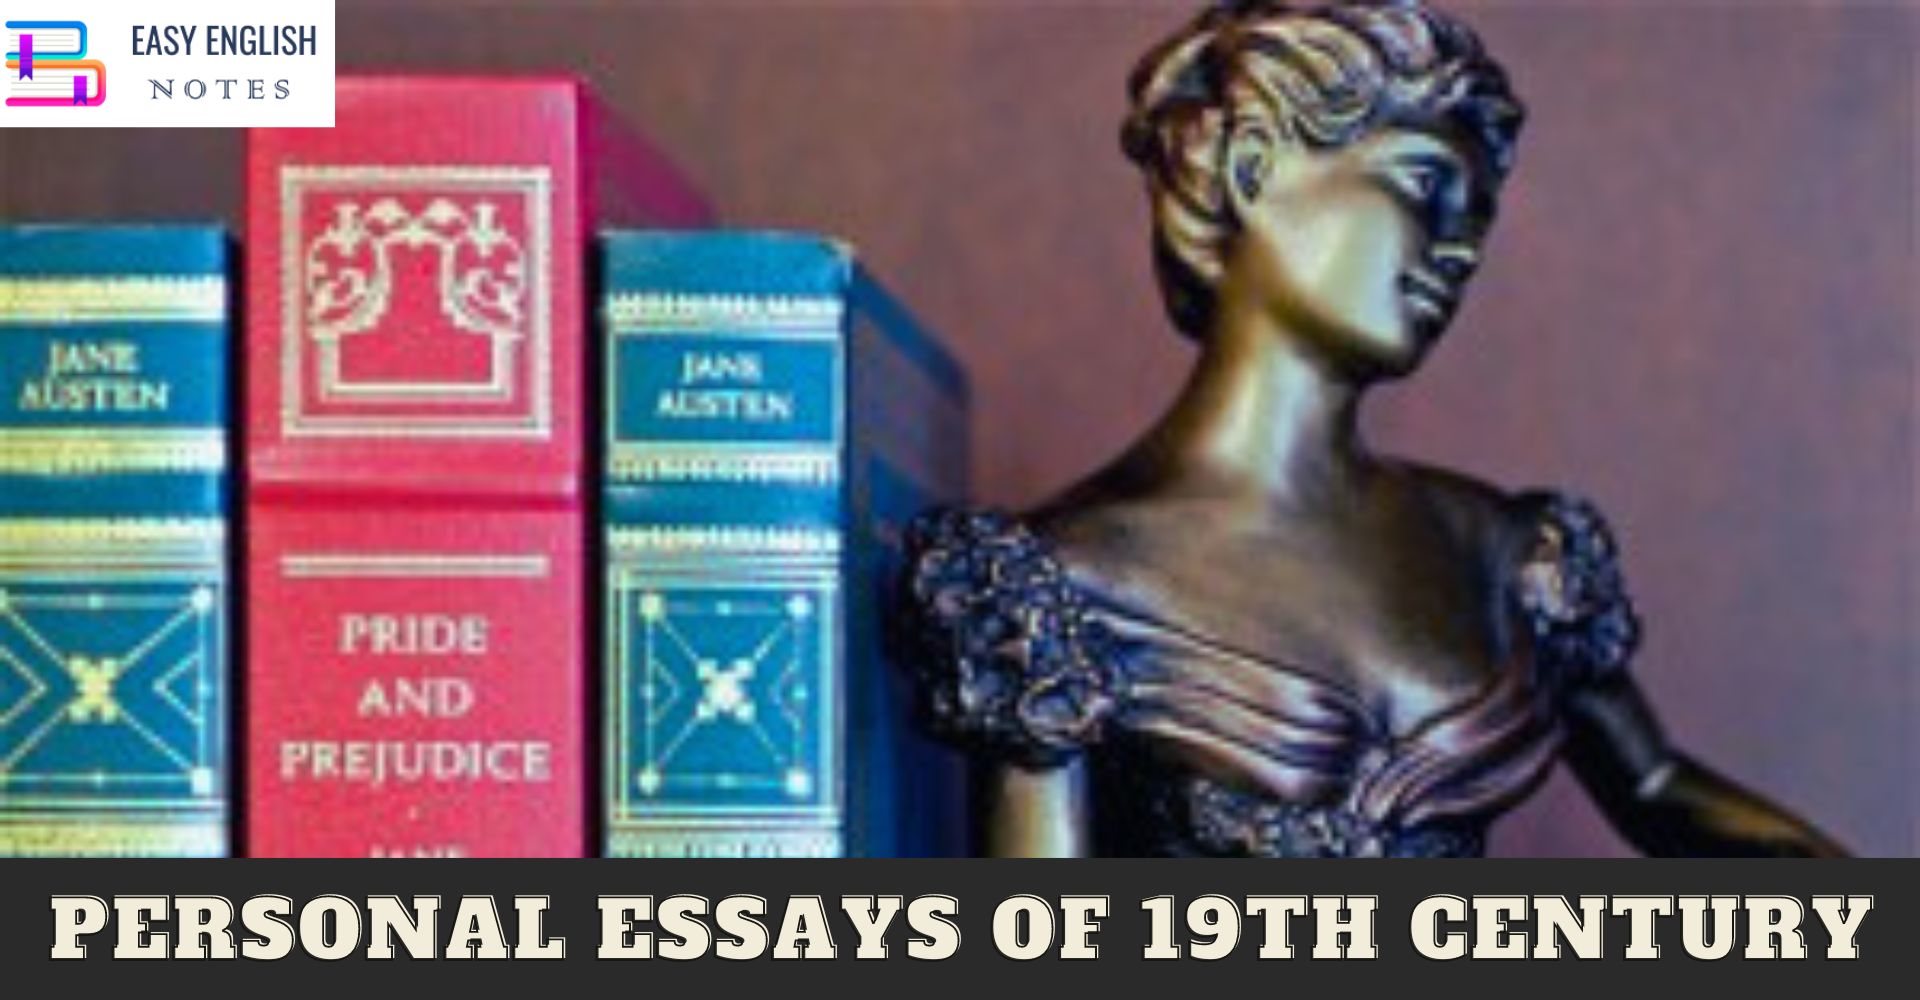 Personal Essays of 19th Century